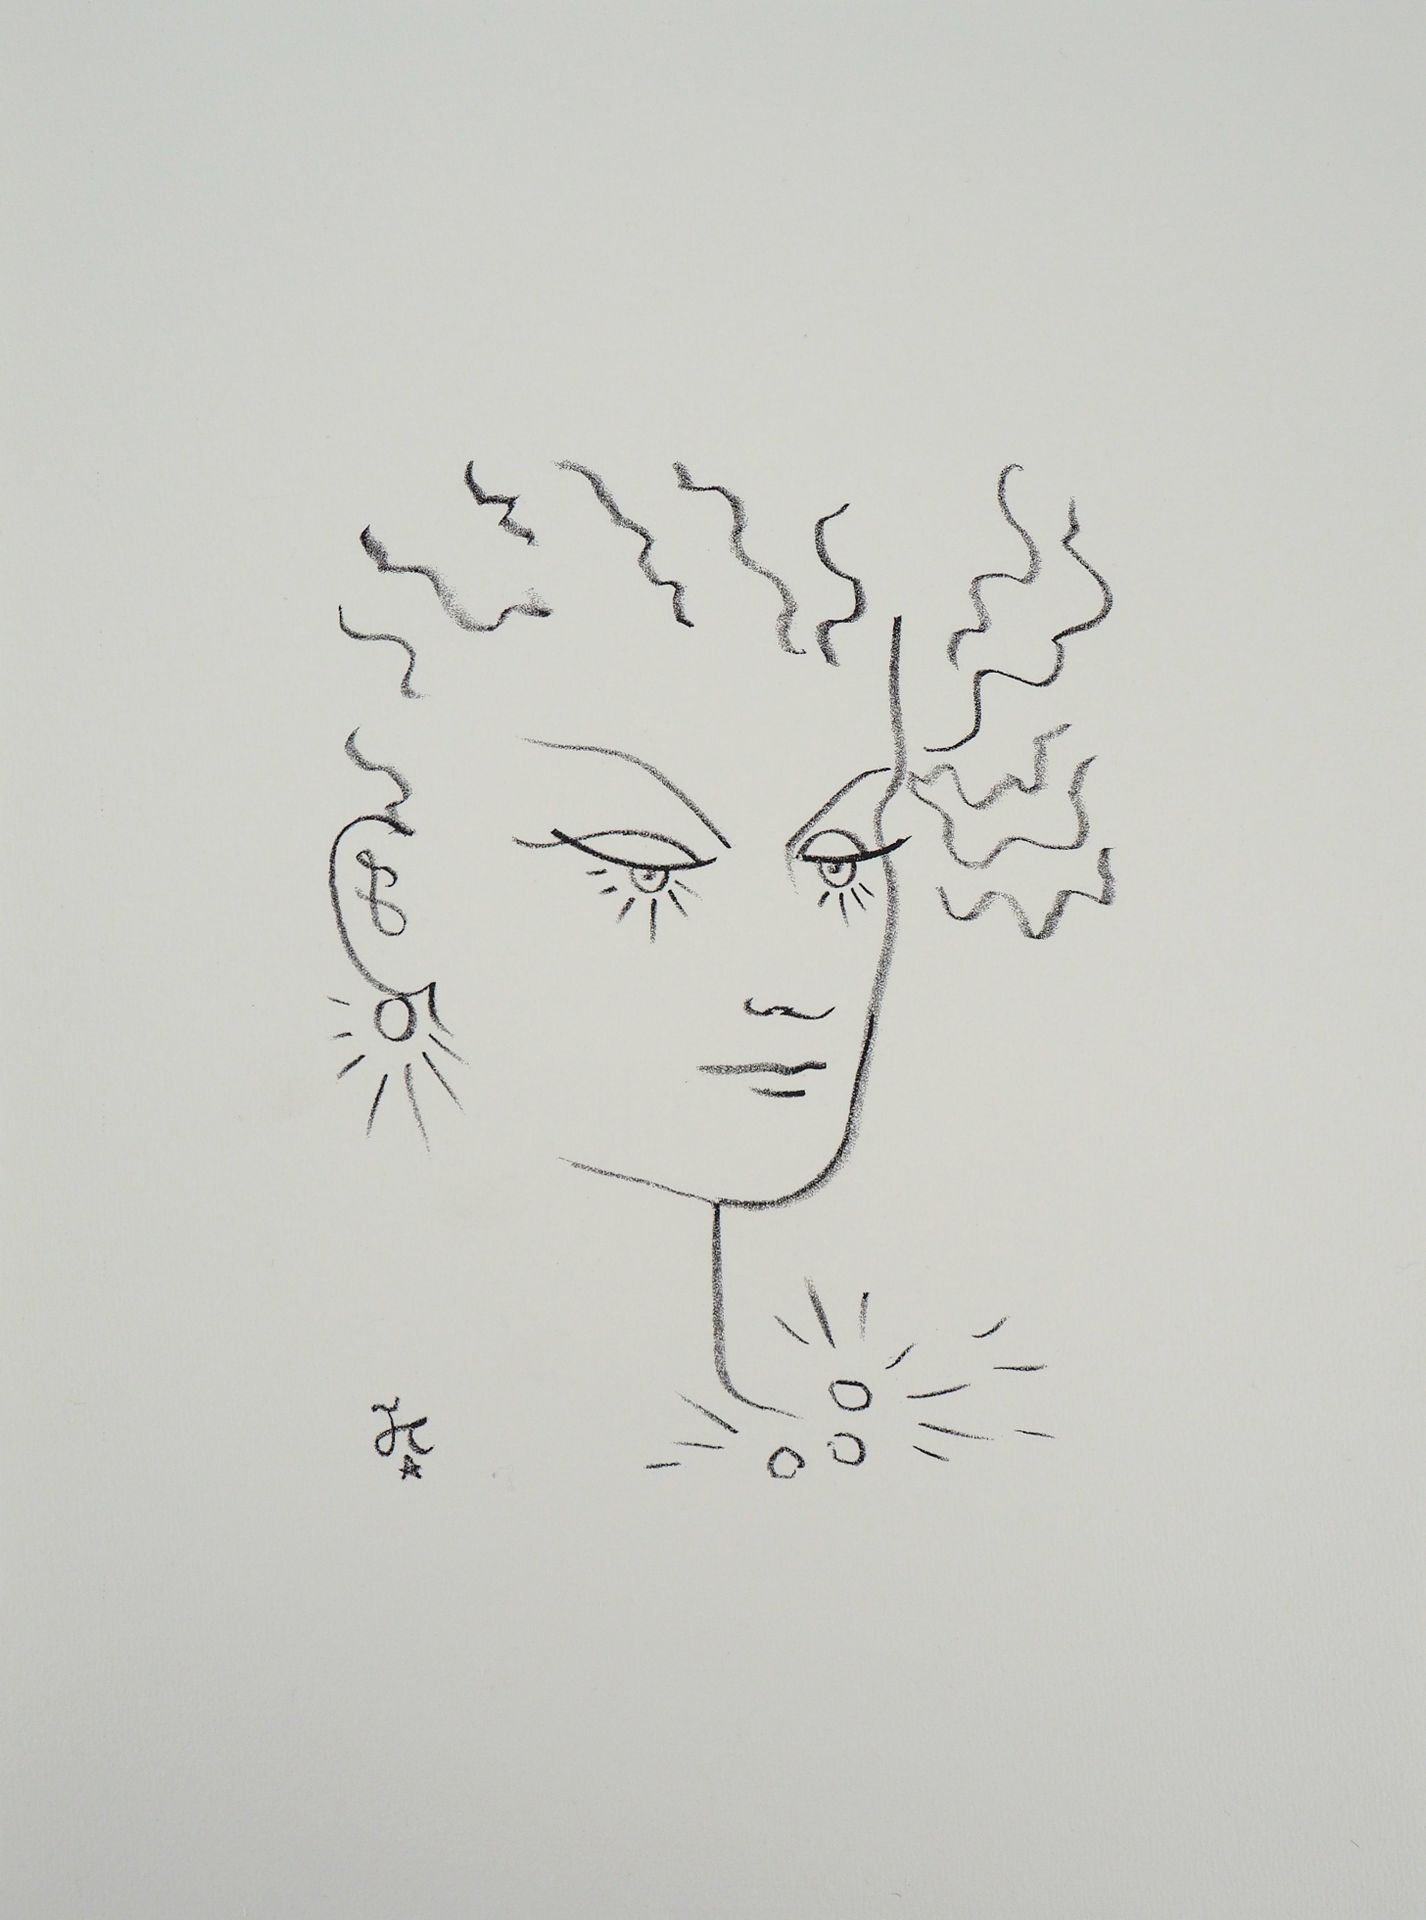 JEAN COCTEAU Jean COCTEAU

The pearl set

Lithograph on Vellum paper

Signed in &hellip;